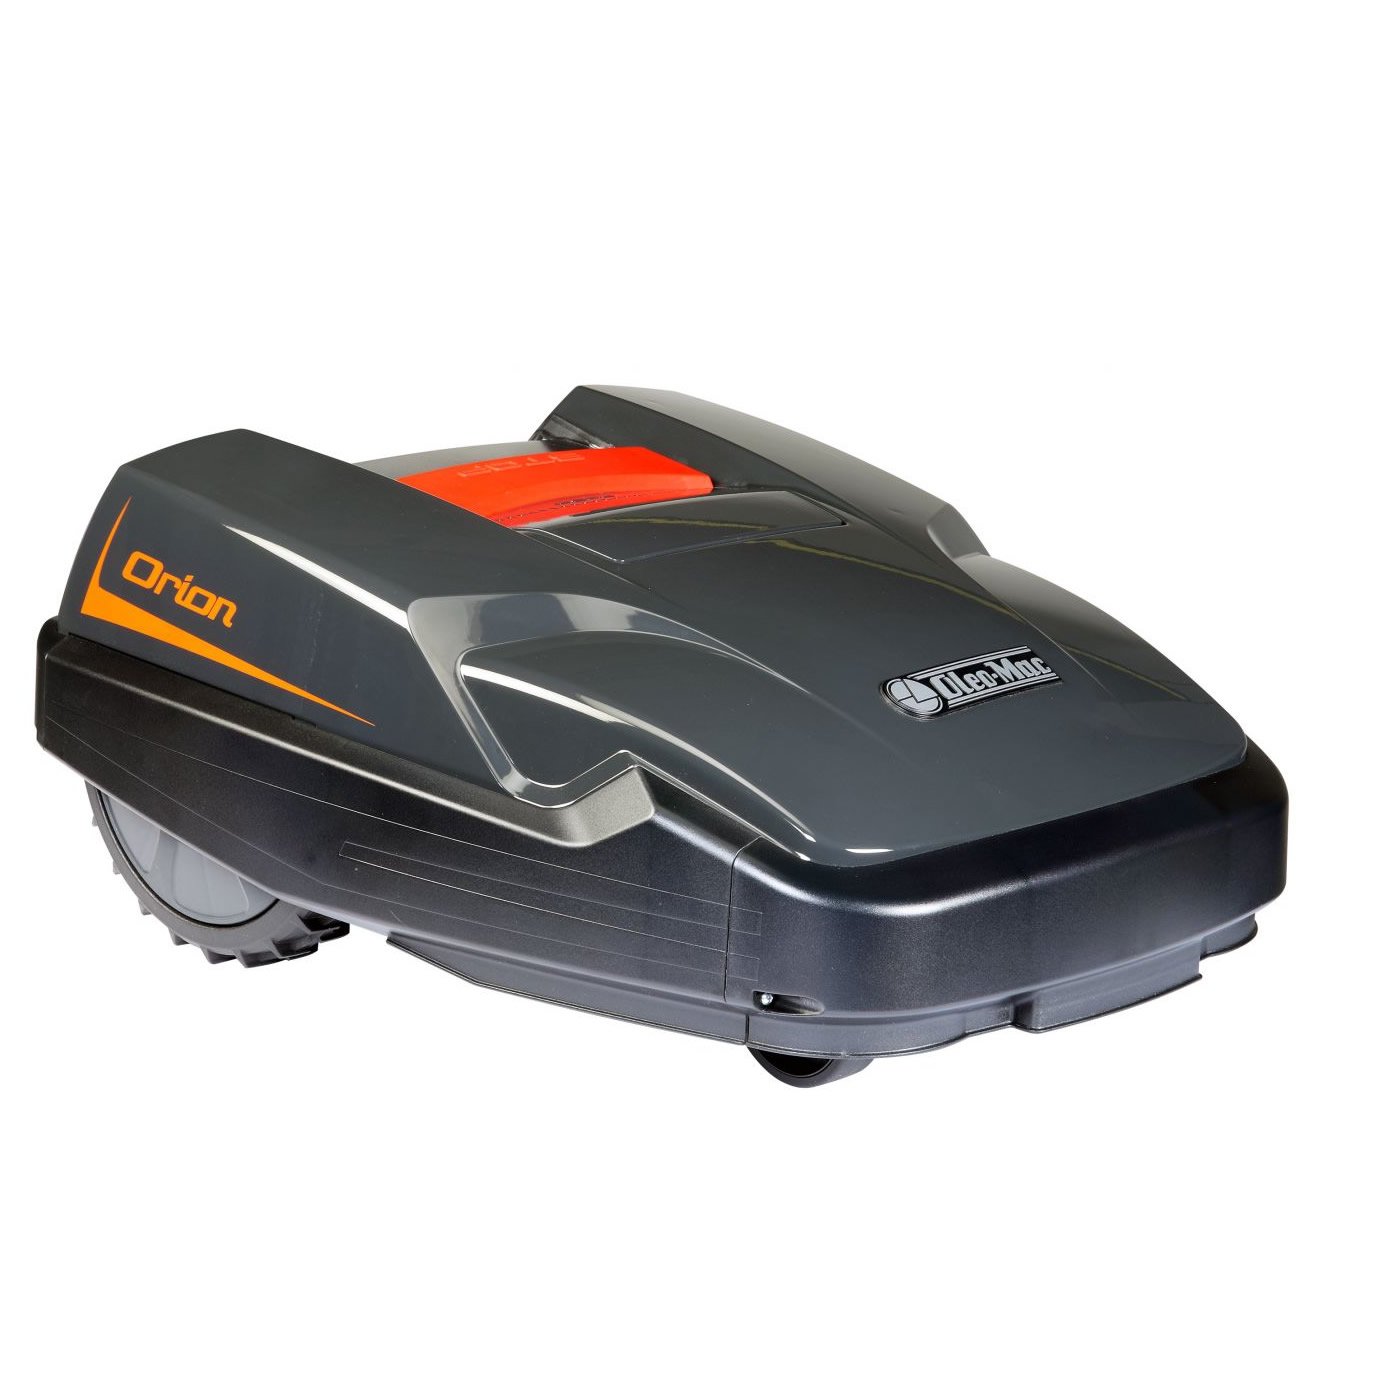 Oleo-Mac Orion Fully Automated Robotic Lawn Mower with Docking Station